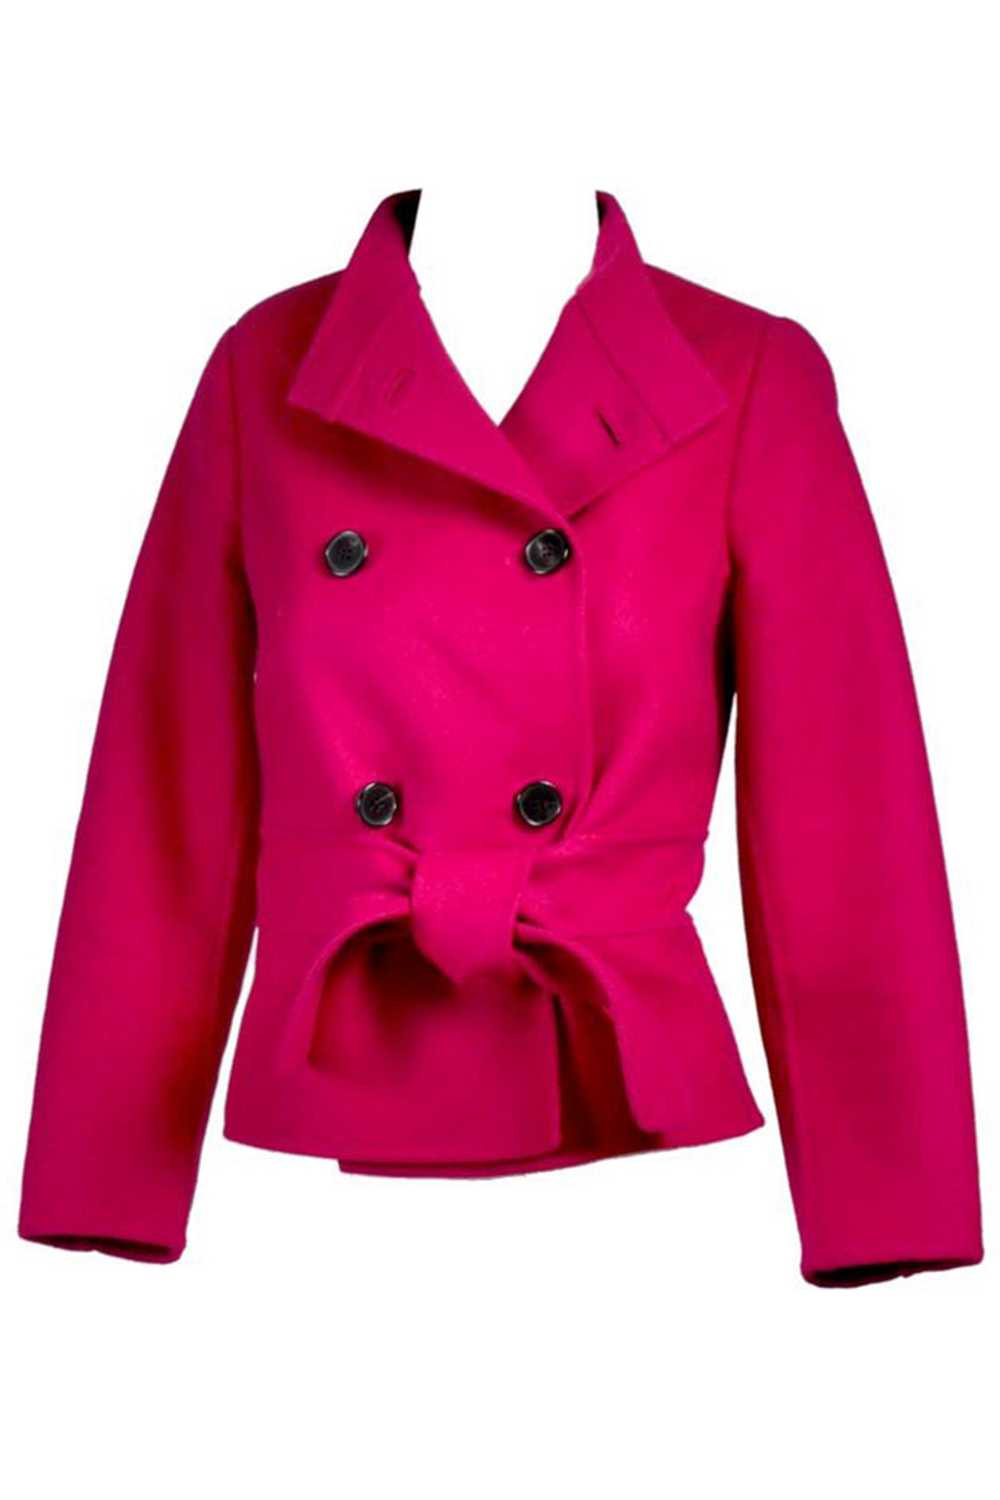 Valentino L'Amour Double Breasted Jacket Raspberr… - image 1